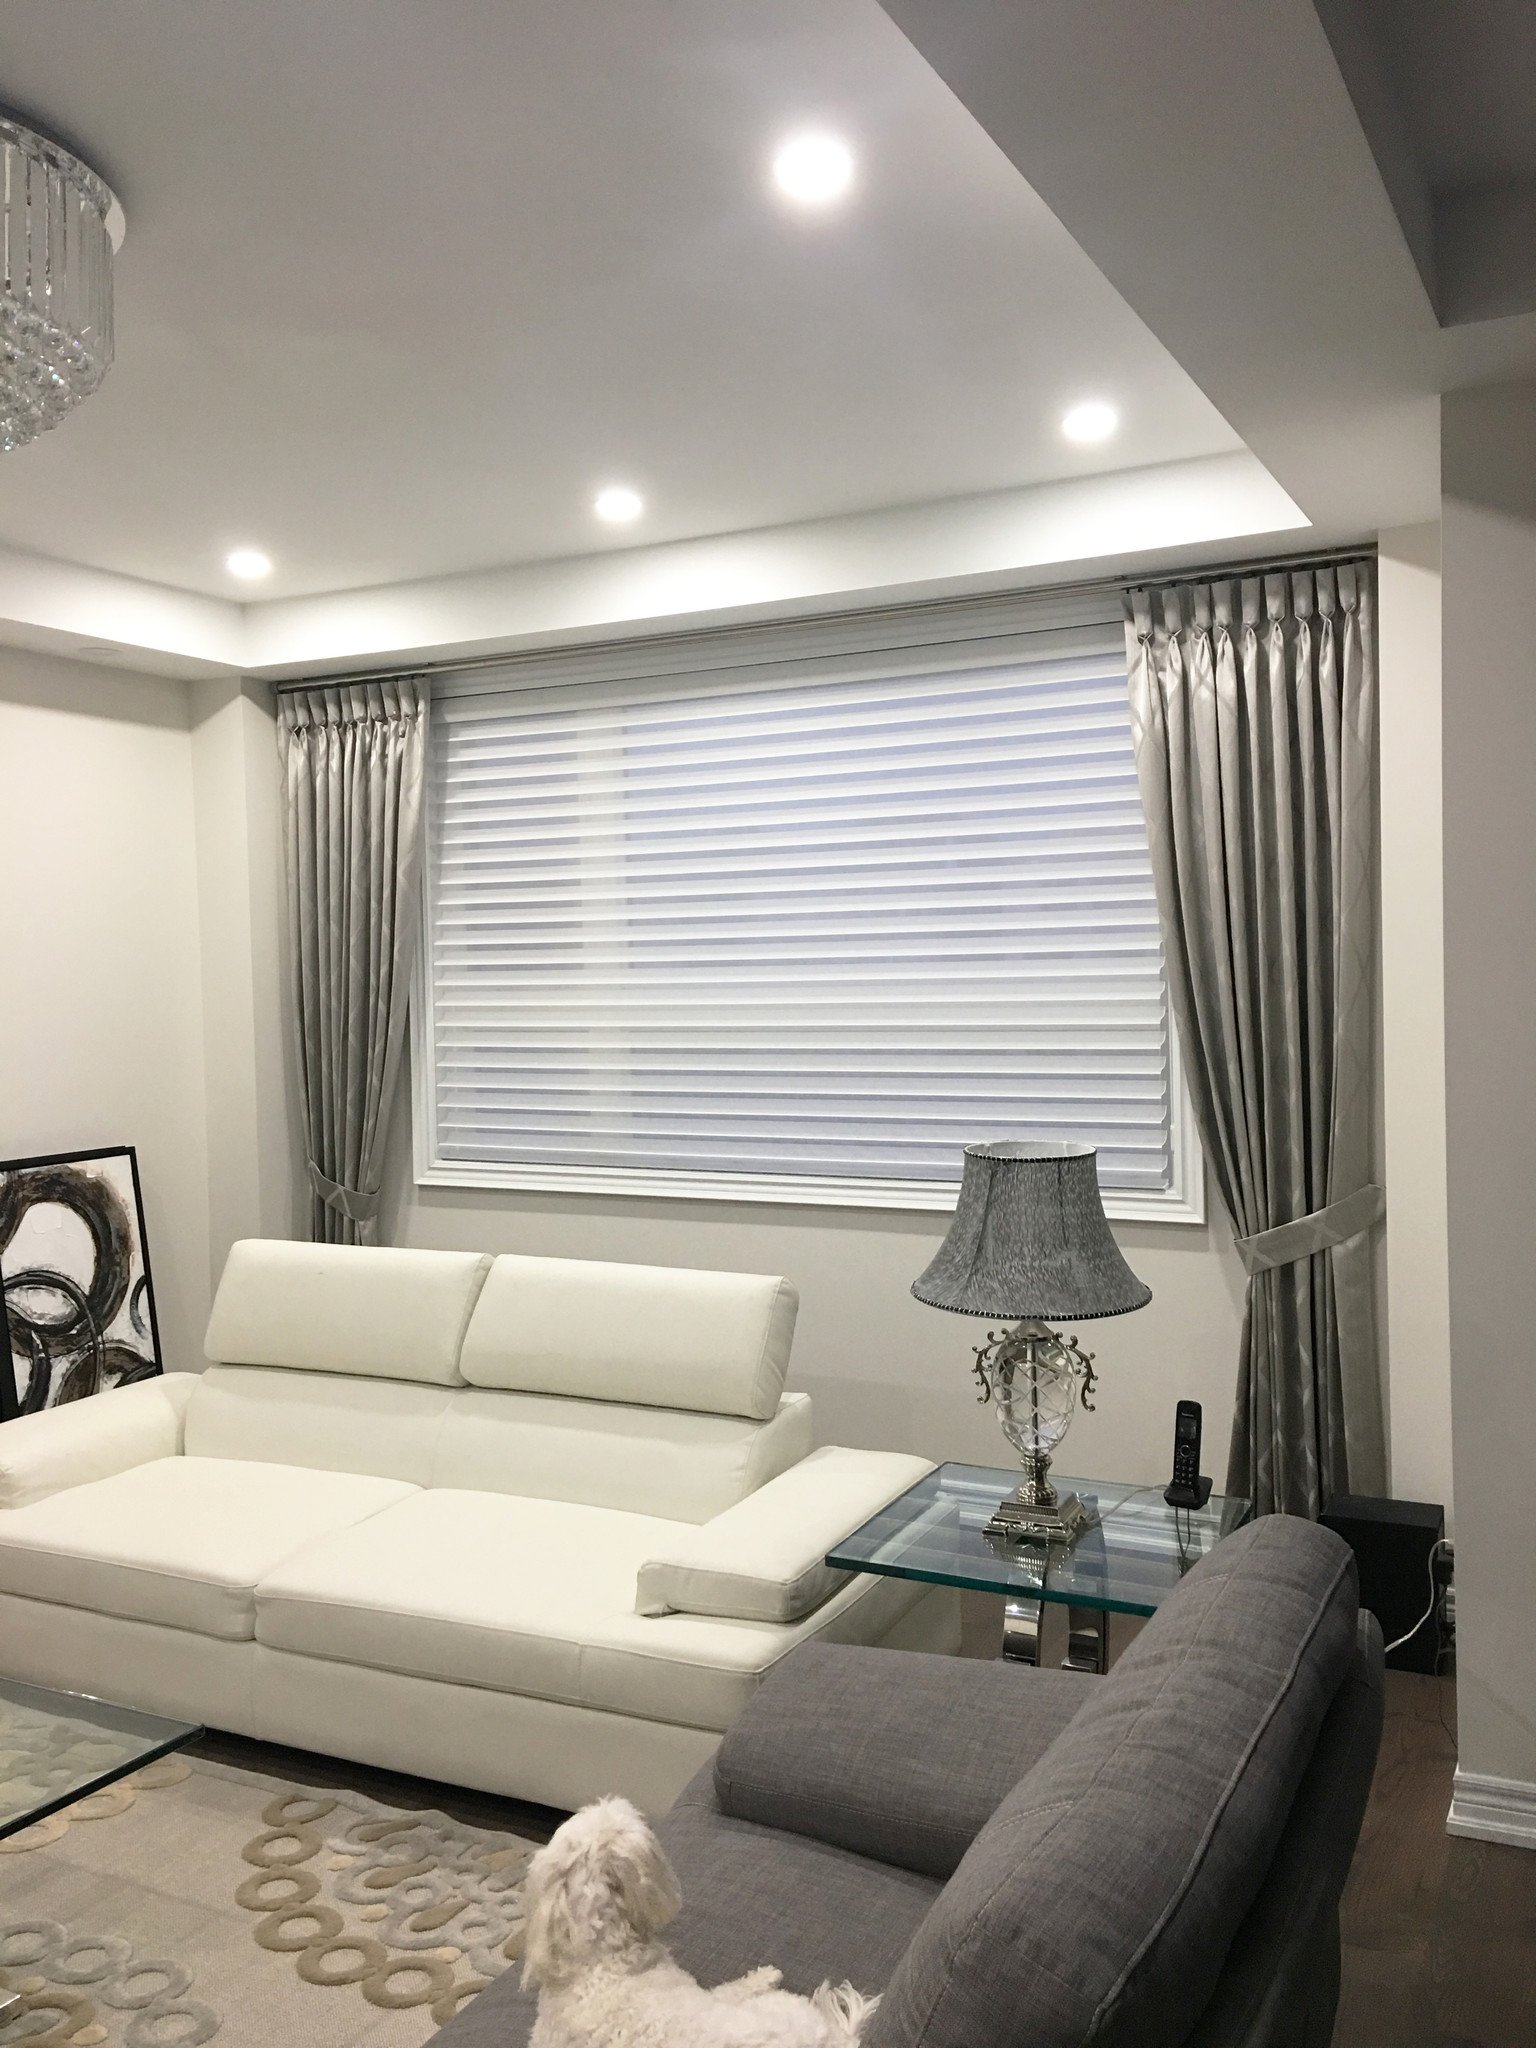 Blinds and Drapery Combination - Best of Both Worlds